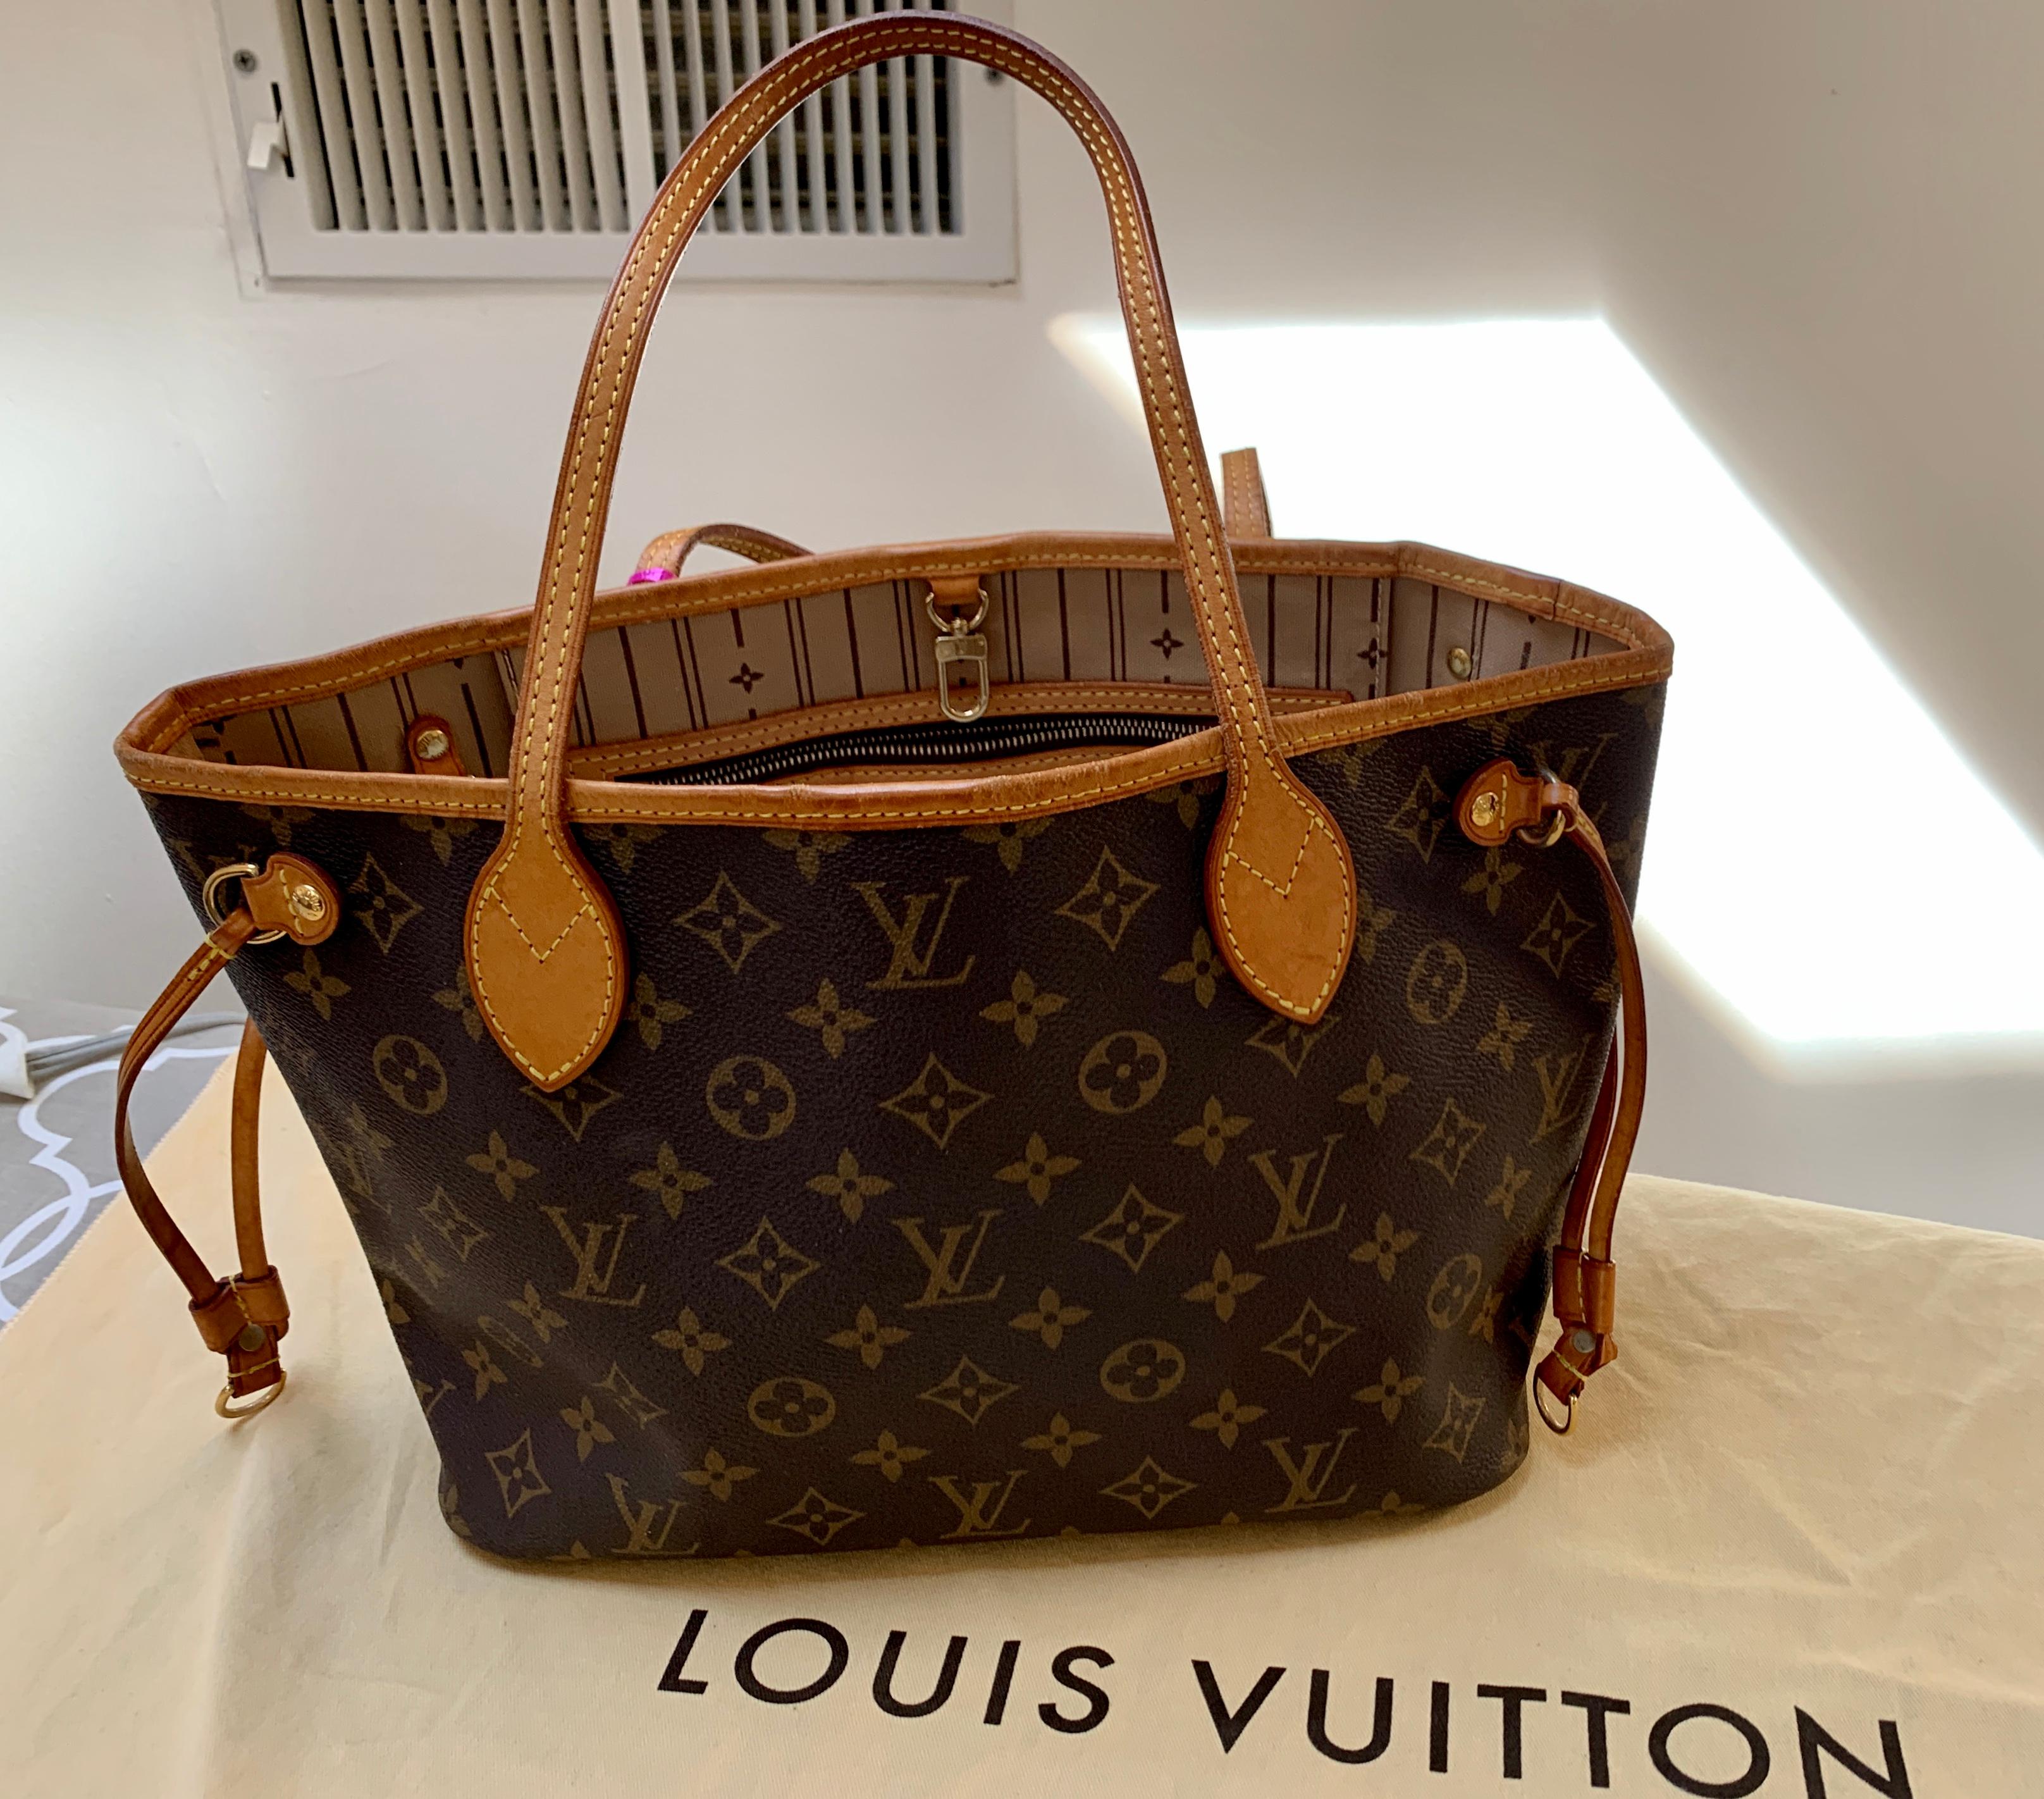 Louis Vuitton Neverfull Pm Monogram Brown Tote
Brown and tan monogram coated canvas Louis Vuitton Neverfull PM with brass hardware, dual flat shoulder straps, tan Vachetta leather trim, drawstring accents at sides, tonal striped canvas lining,